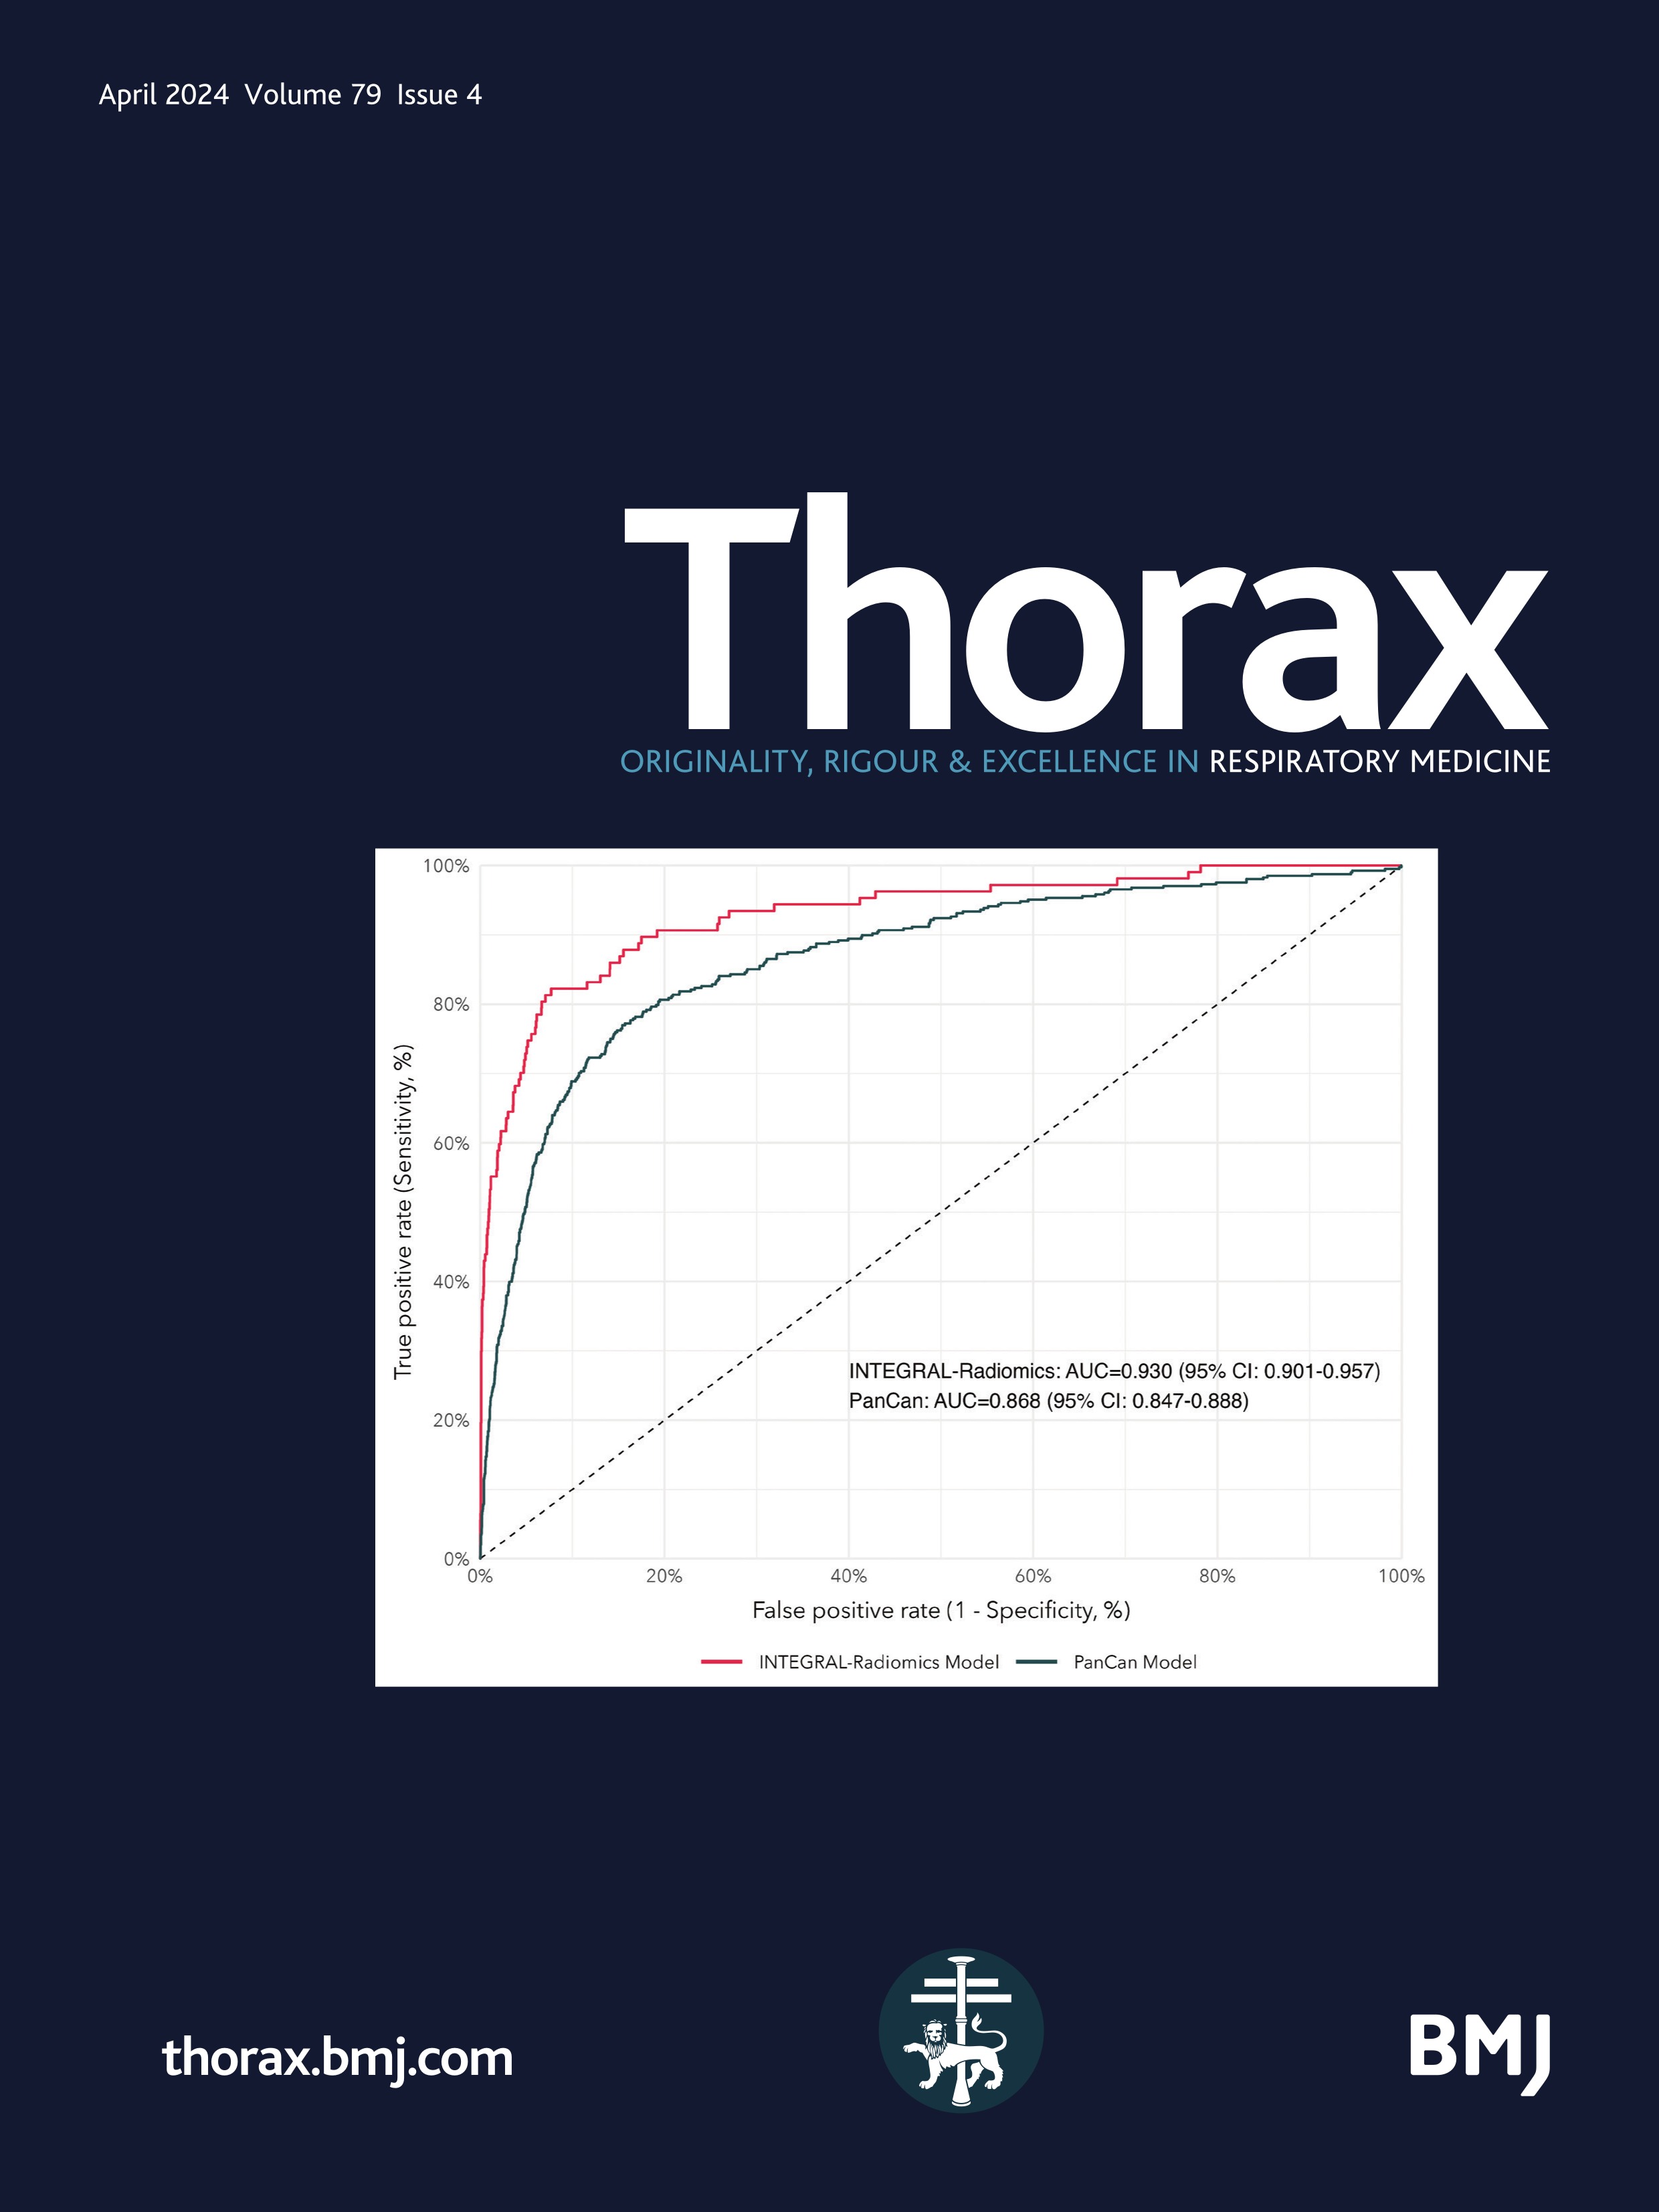 Use of inhaled treprostinil in patients with interstitial lung disease and pulmonary hypertension: to boldly go where no other pulmonary vasodilator has gone before?